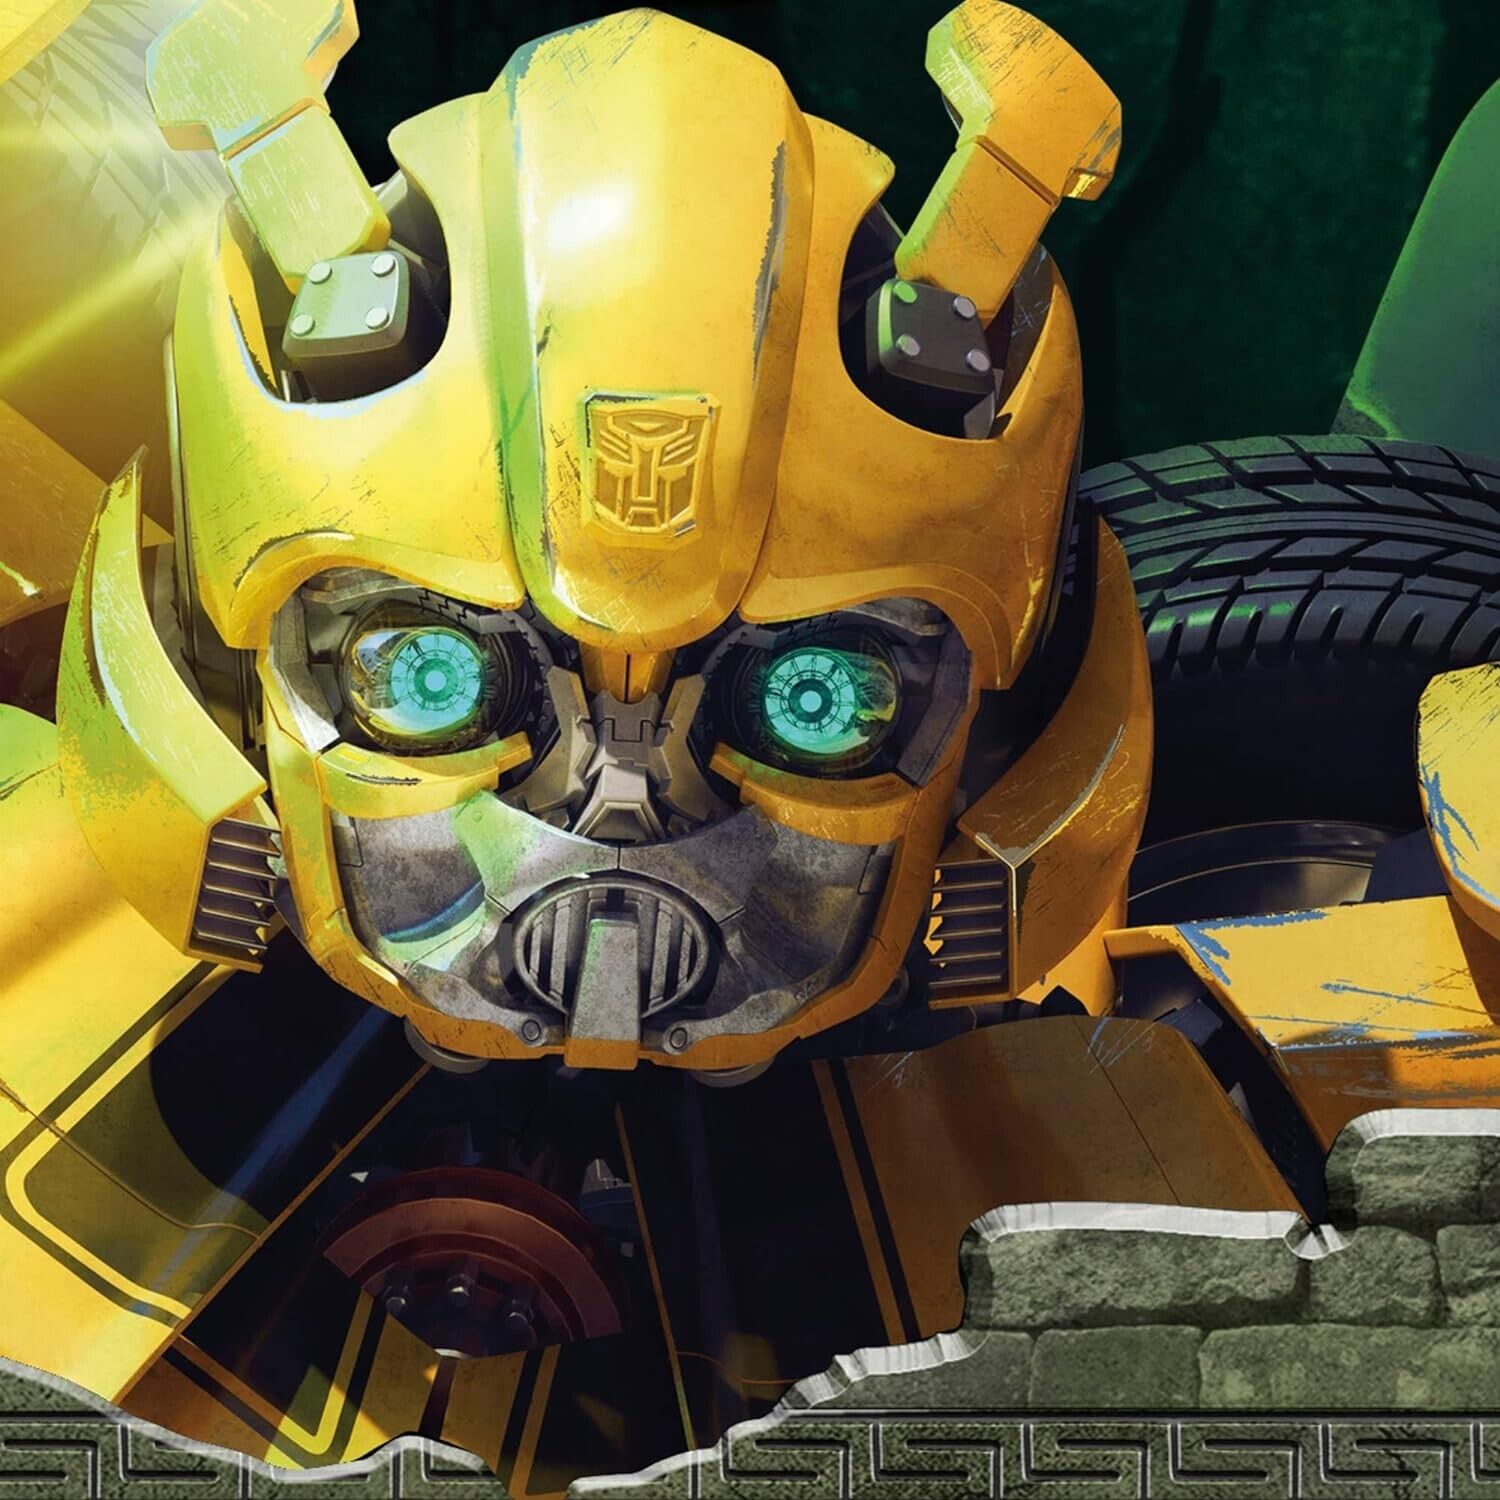 Transformers Action Figure Rise of the Beasts Movie Beast-Mode Bumblebee